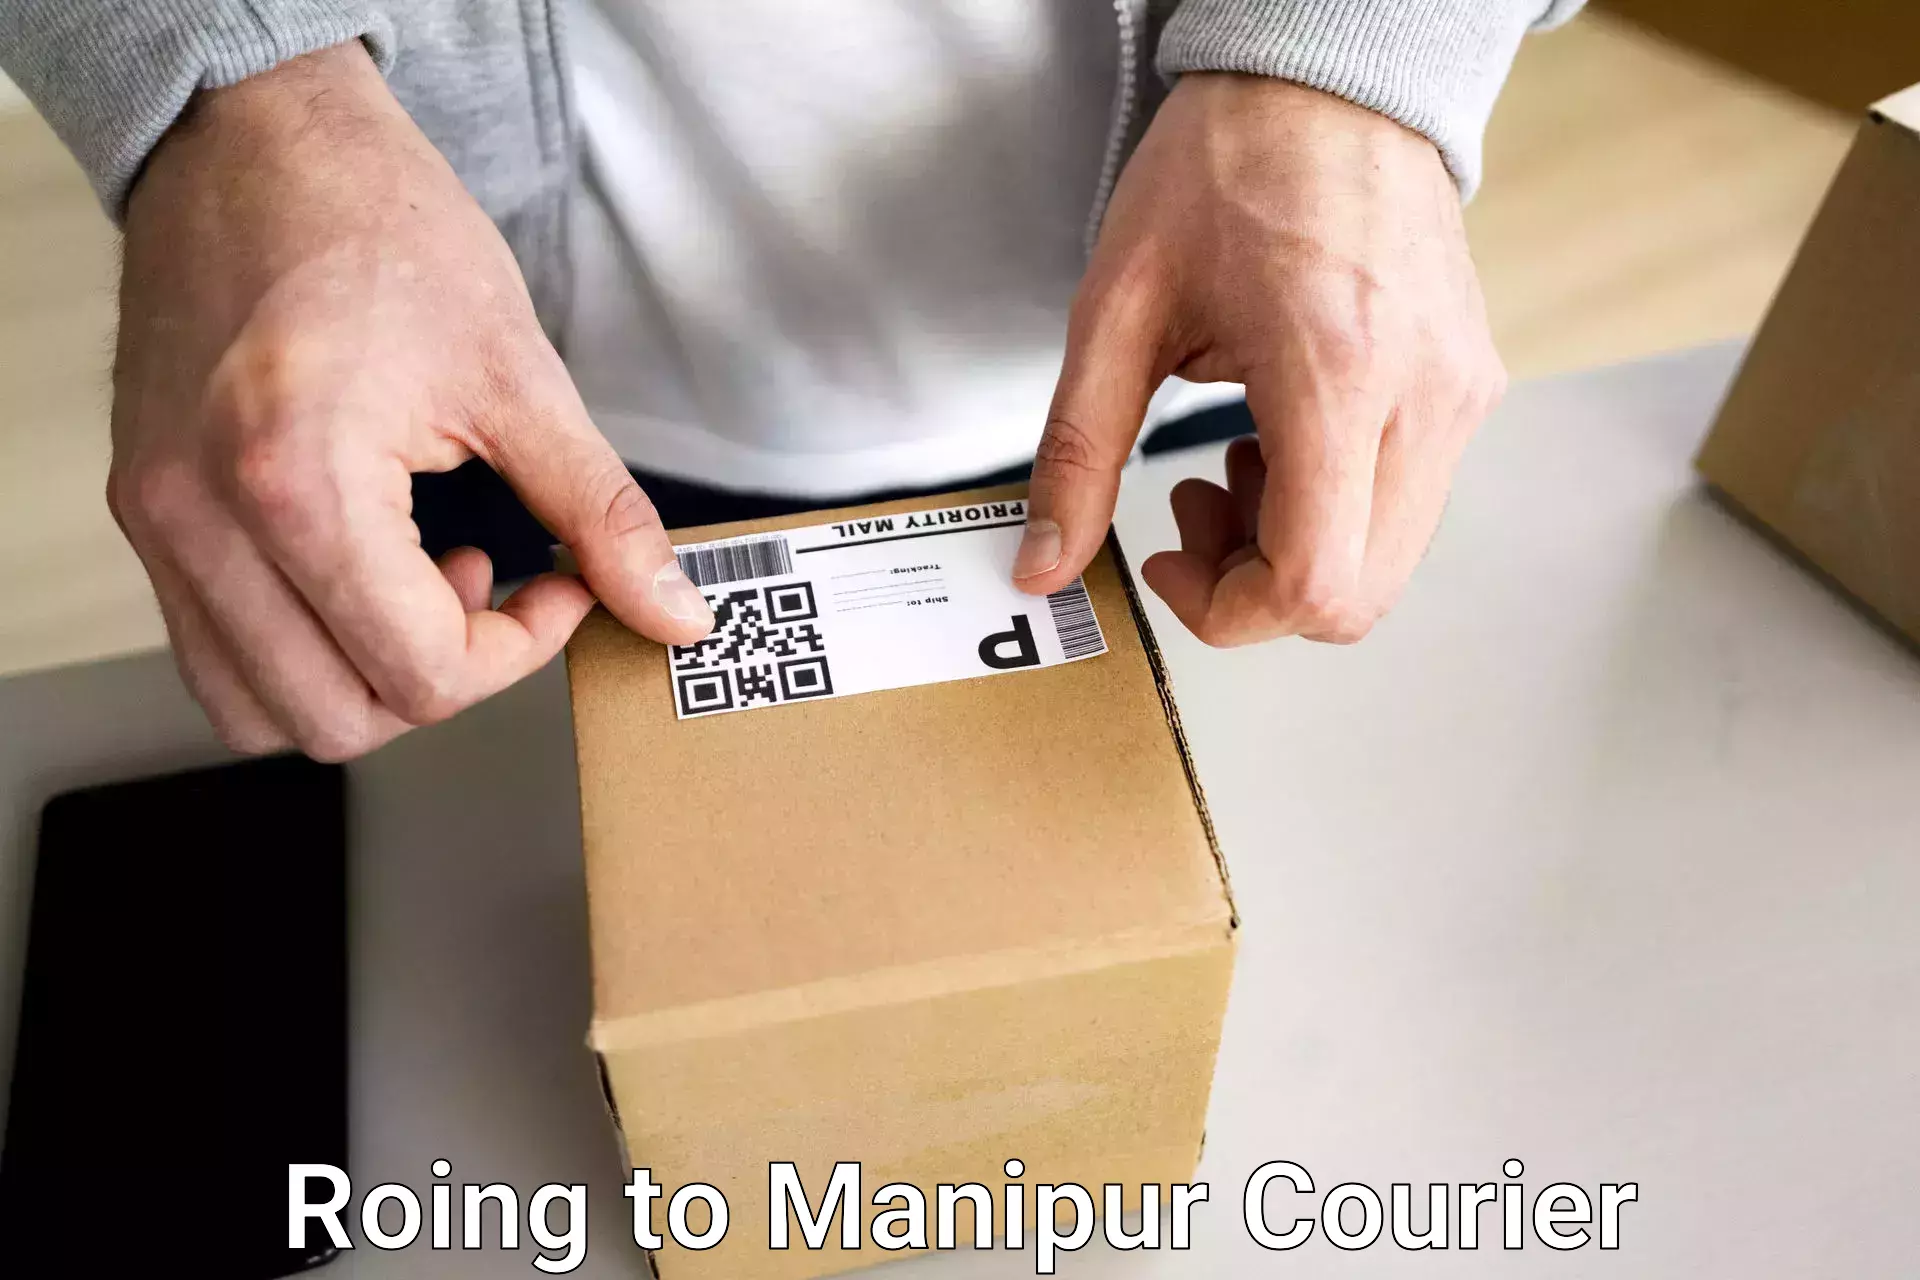 Luggage transfer service Roing to Manipur